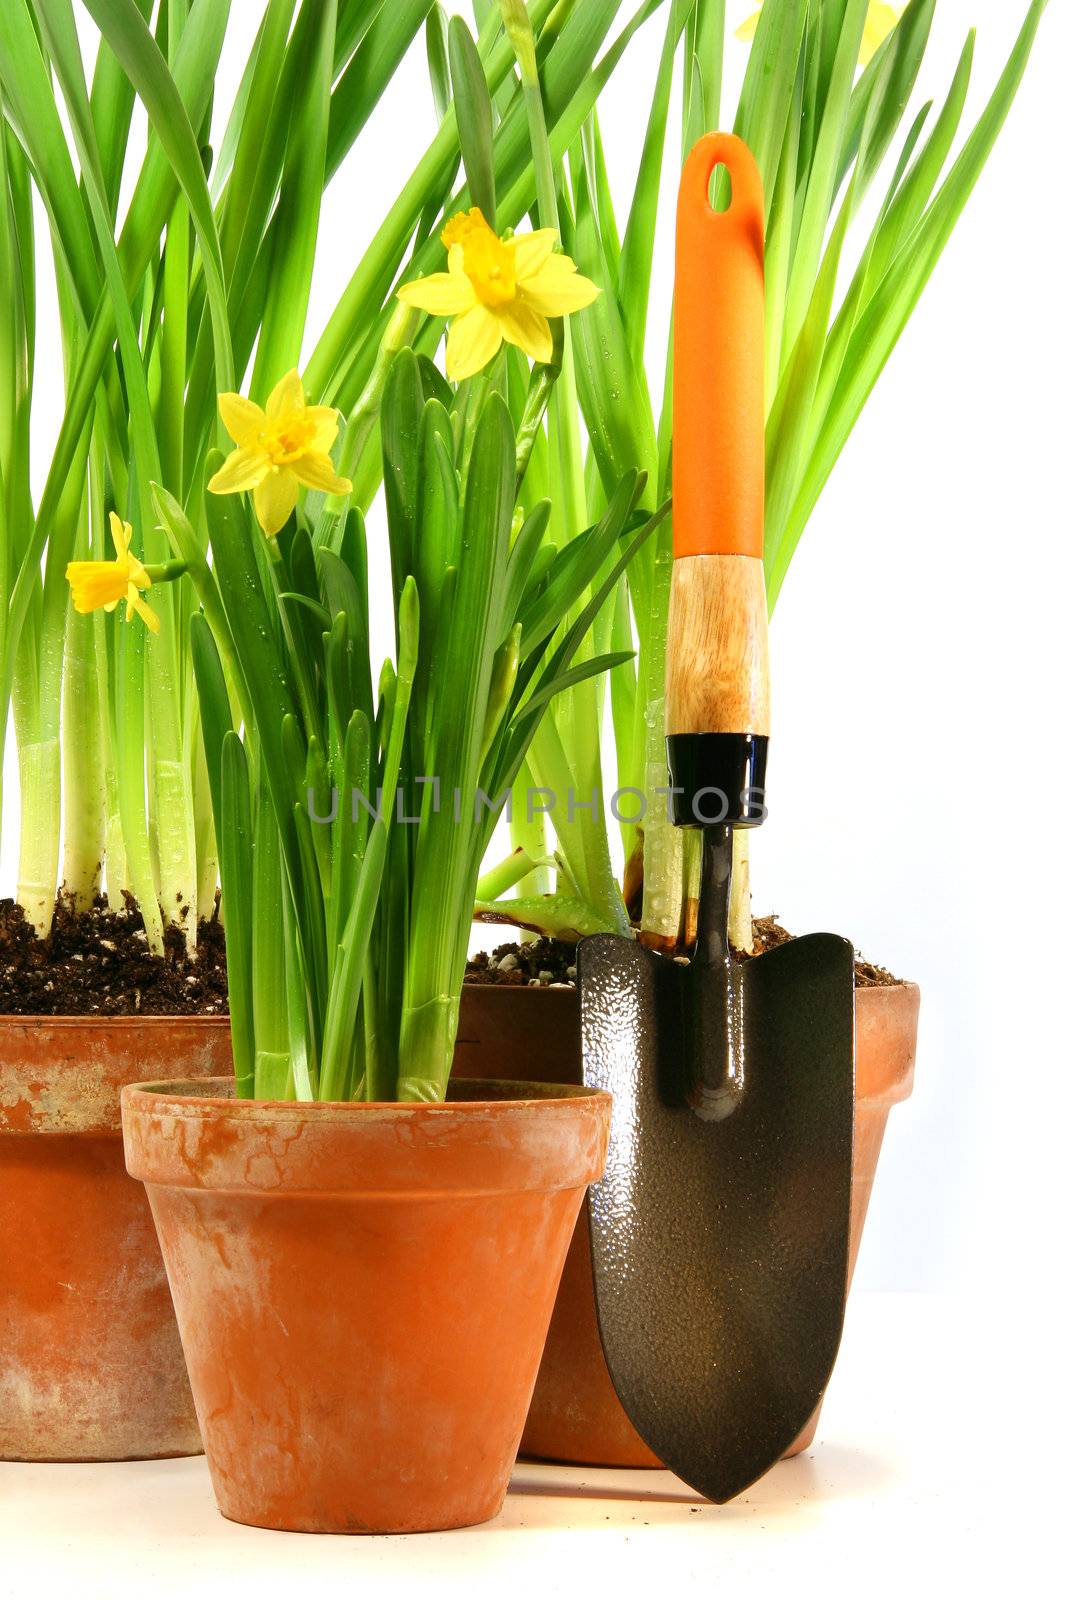 Pots of daffodils with garden shovel by Sandralise